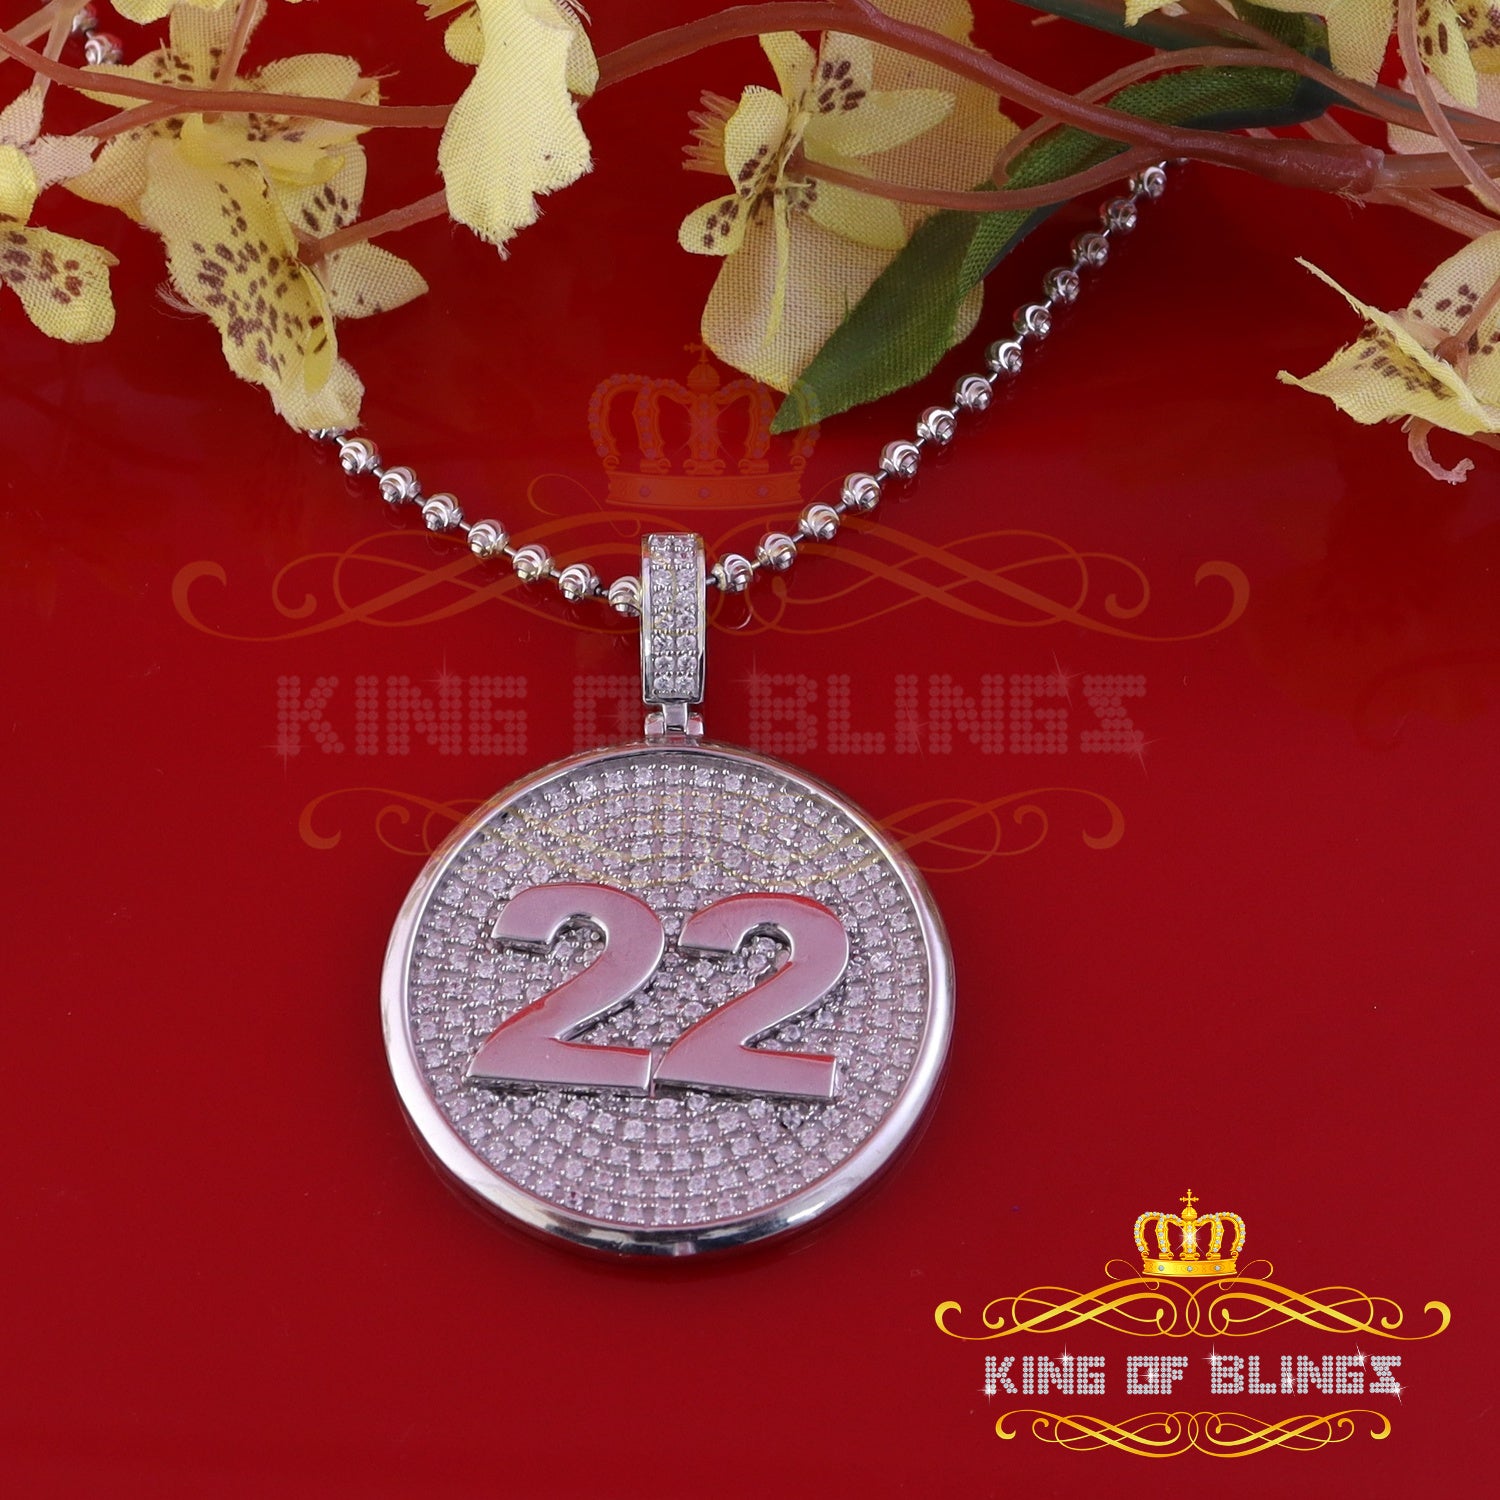 Create Custom Design in Cubic Zirconia Silver White "1.50" Round #22 Lucky Charm Pendant KING OF BLINGS